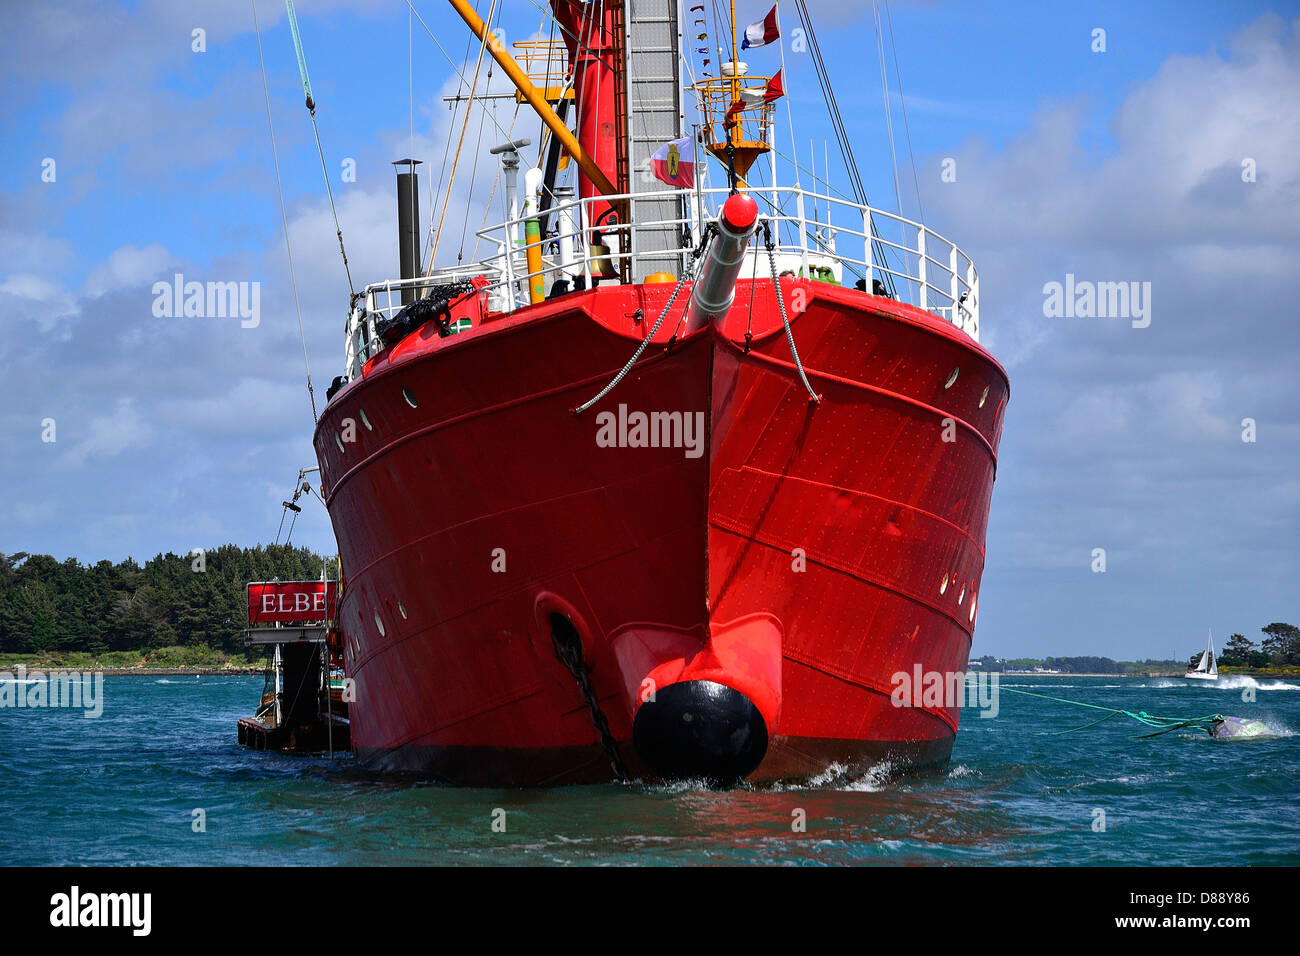 Elbe 1, old lightship (Cuxhaven, Germany), here anchored in the Morbihan gulf (Arradon harbour). Stock Photo